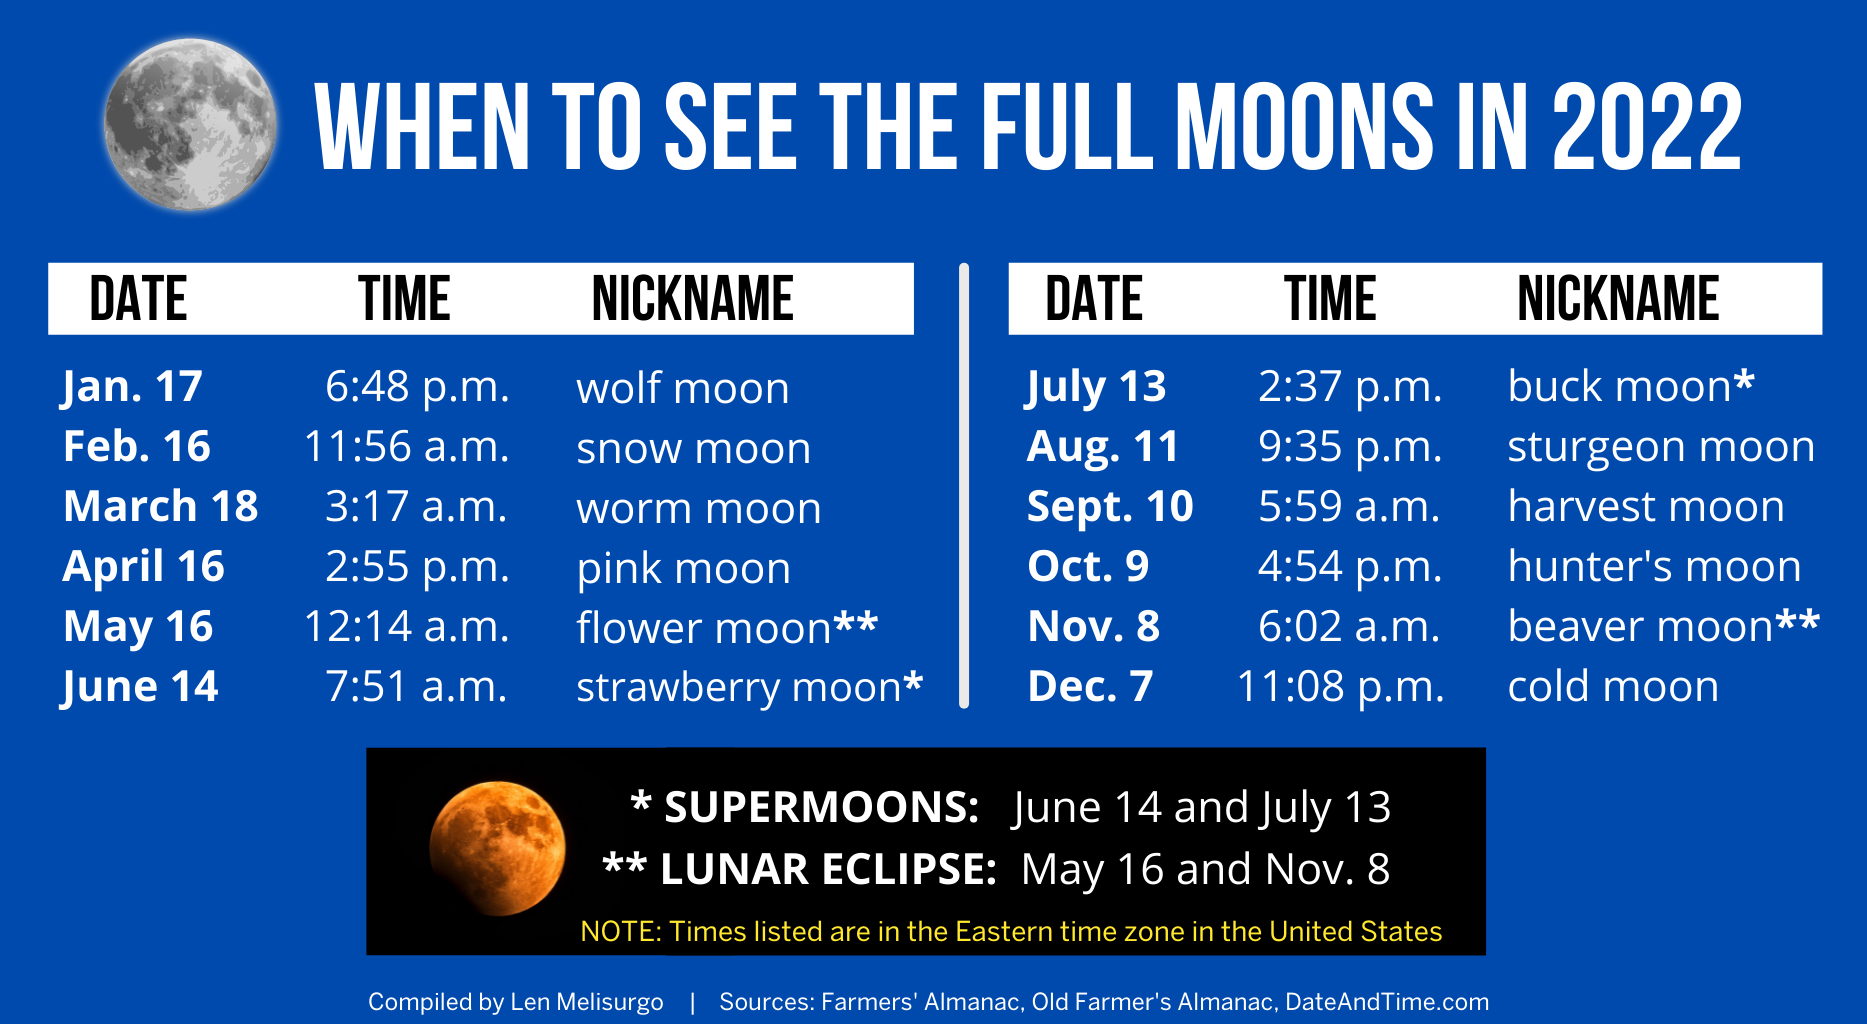 Full Moon Calendar 2022 California The 12 Full Moons In 2022 Will Include 2 Supermoons, 2 Lunar Eclipses -  Nj.com